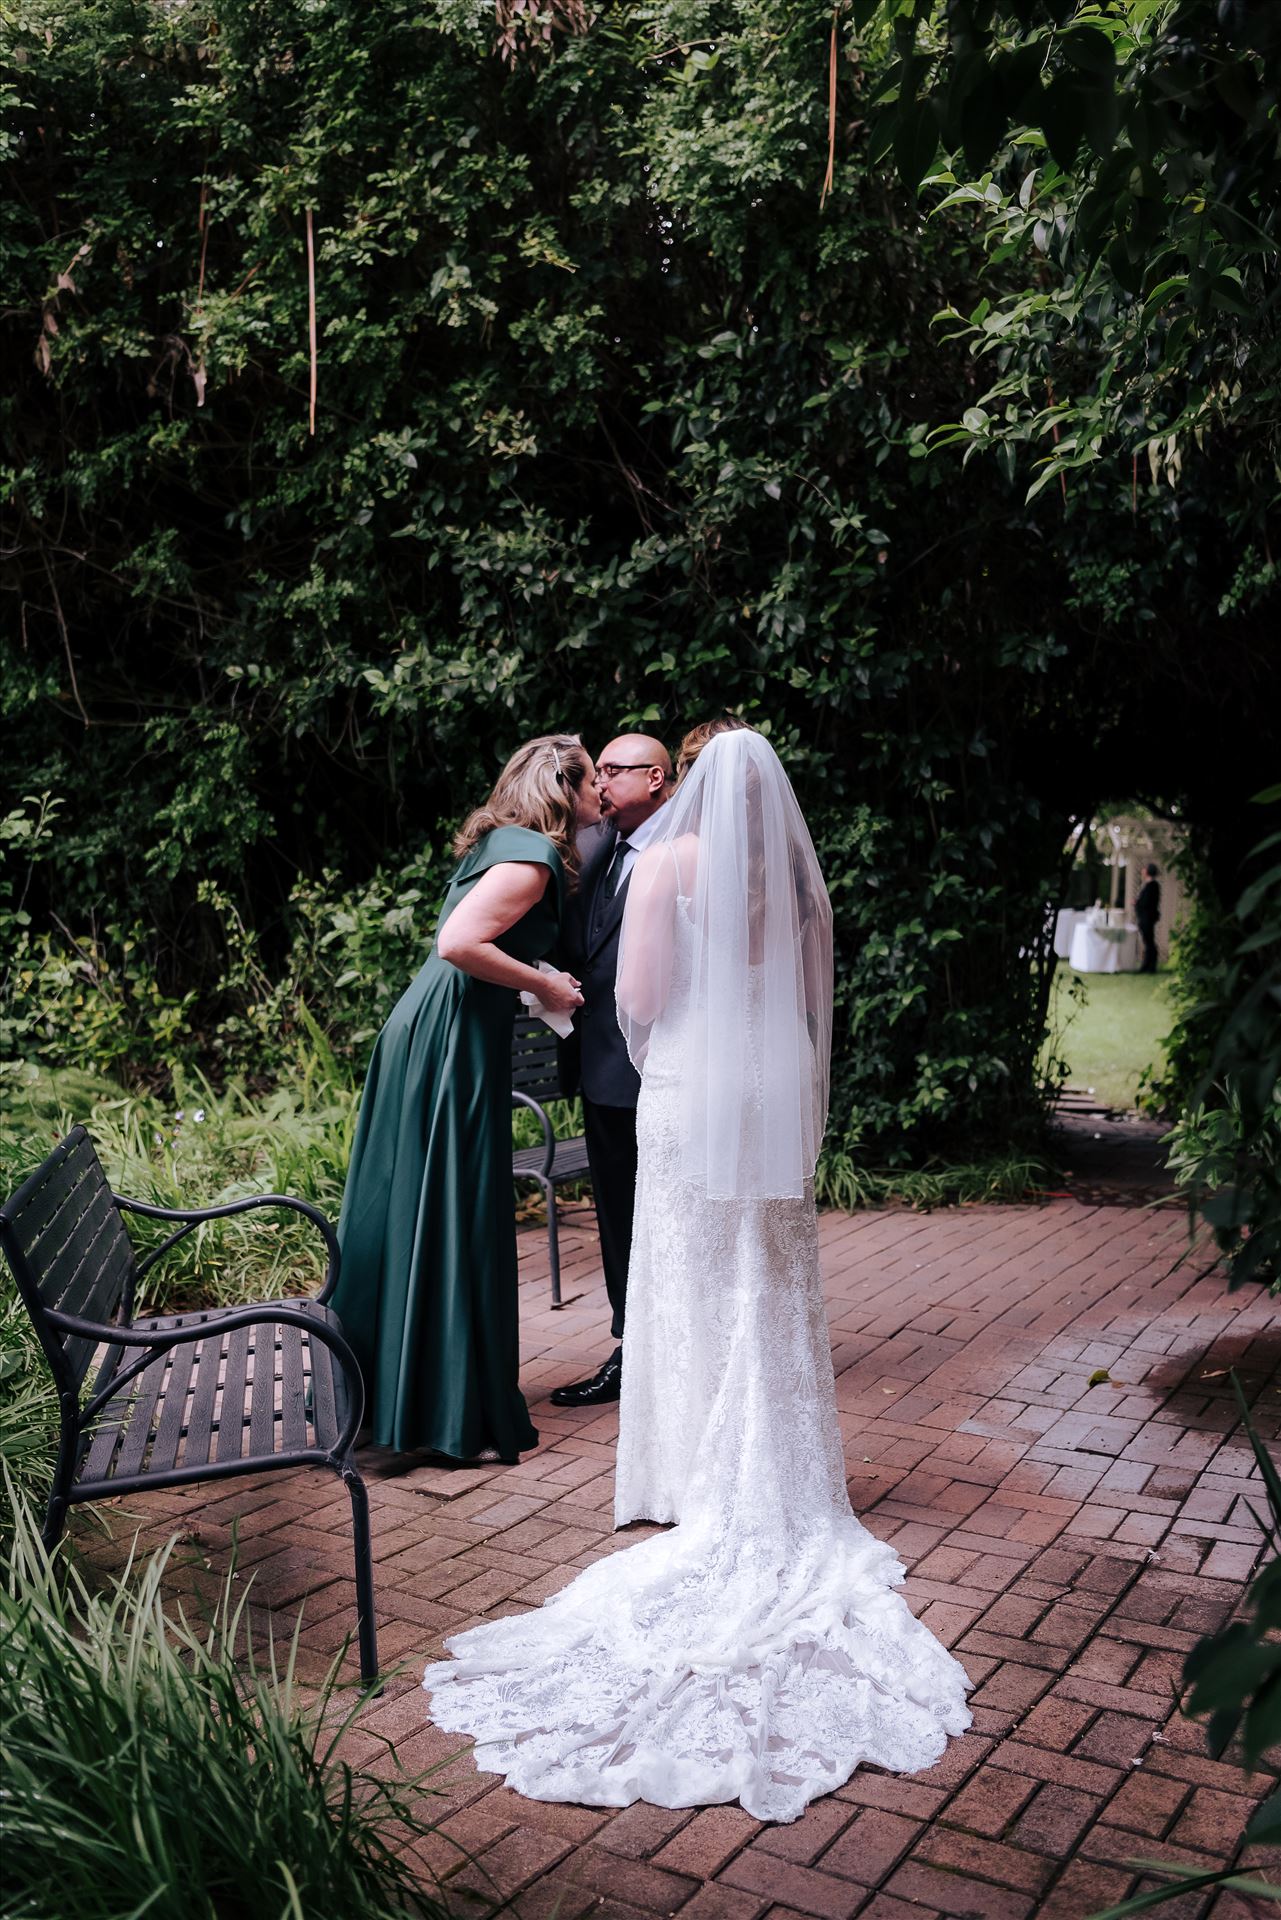 Final-1863.JPG Mirror's Edge Photography San Luis Obispo and Santa Barbara County Wedding Photographer. Kaleidoscope Inn and Gardens Wedding. Bride First Look with Father and Mother. by Sarah Williams